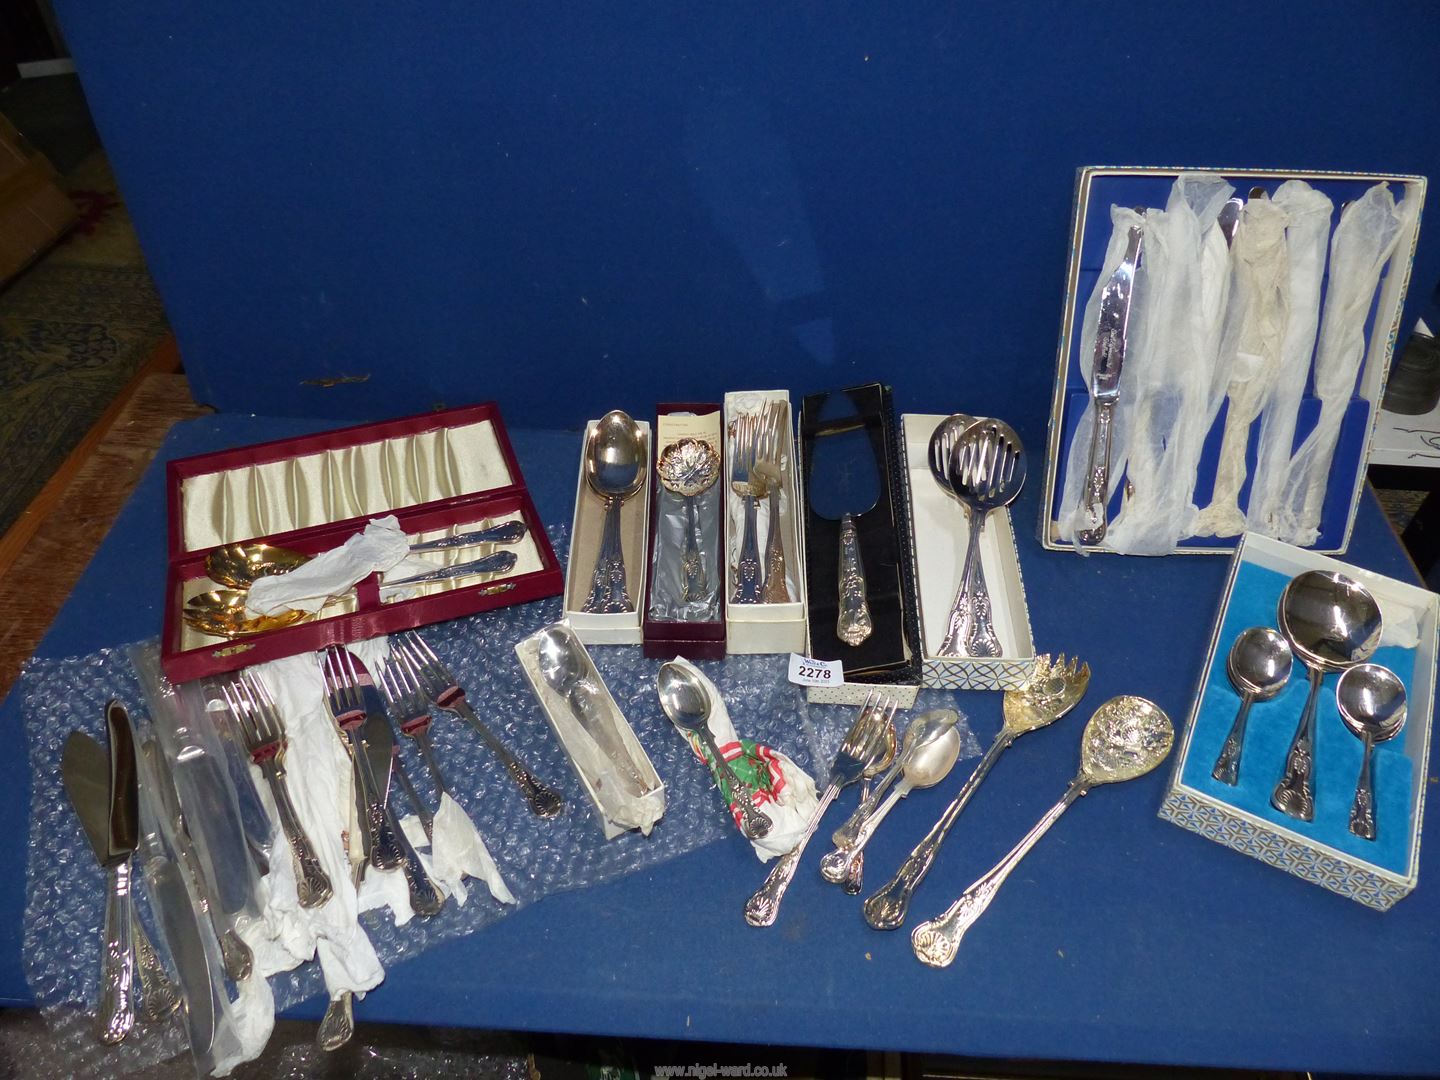 A good quantity of cutlery including knives, forks, serving spoons etc.